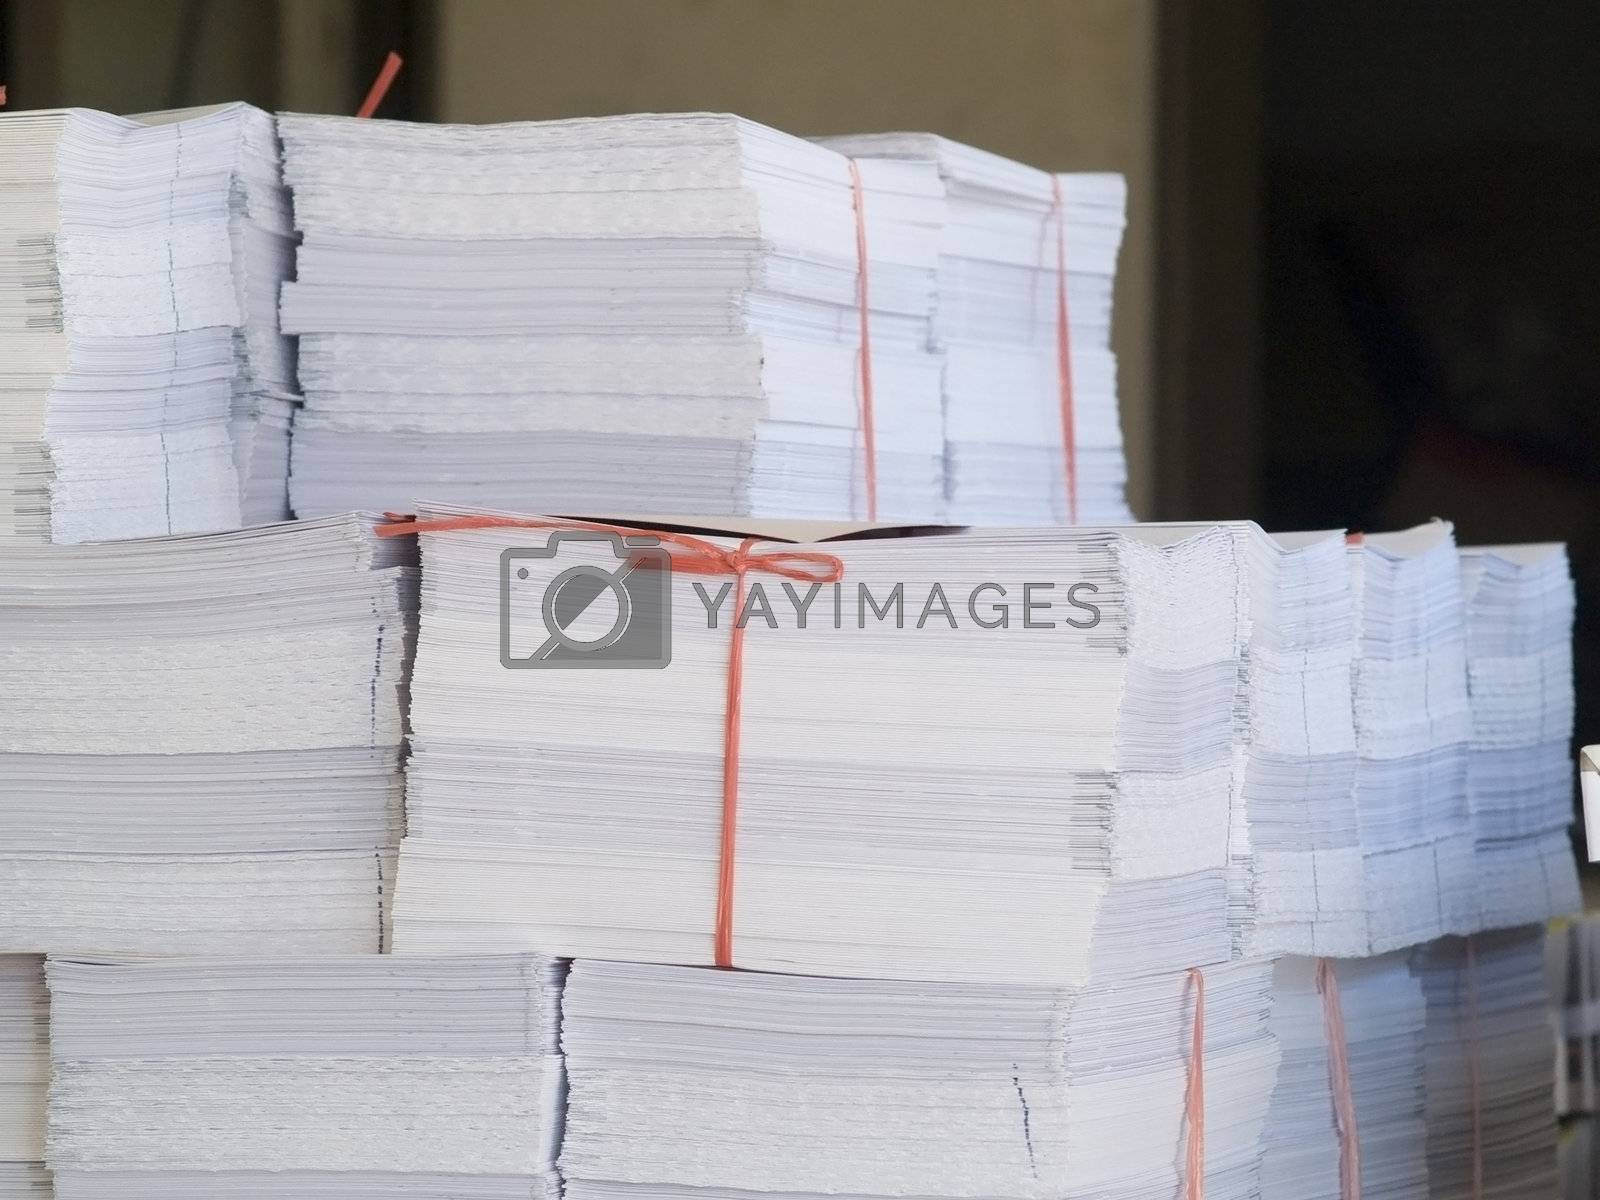 Royalty free image of Piles of printed paper by epixx